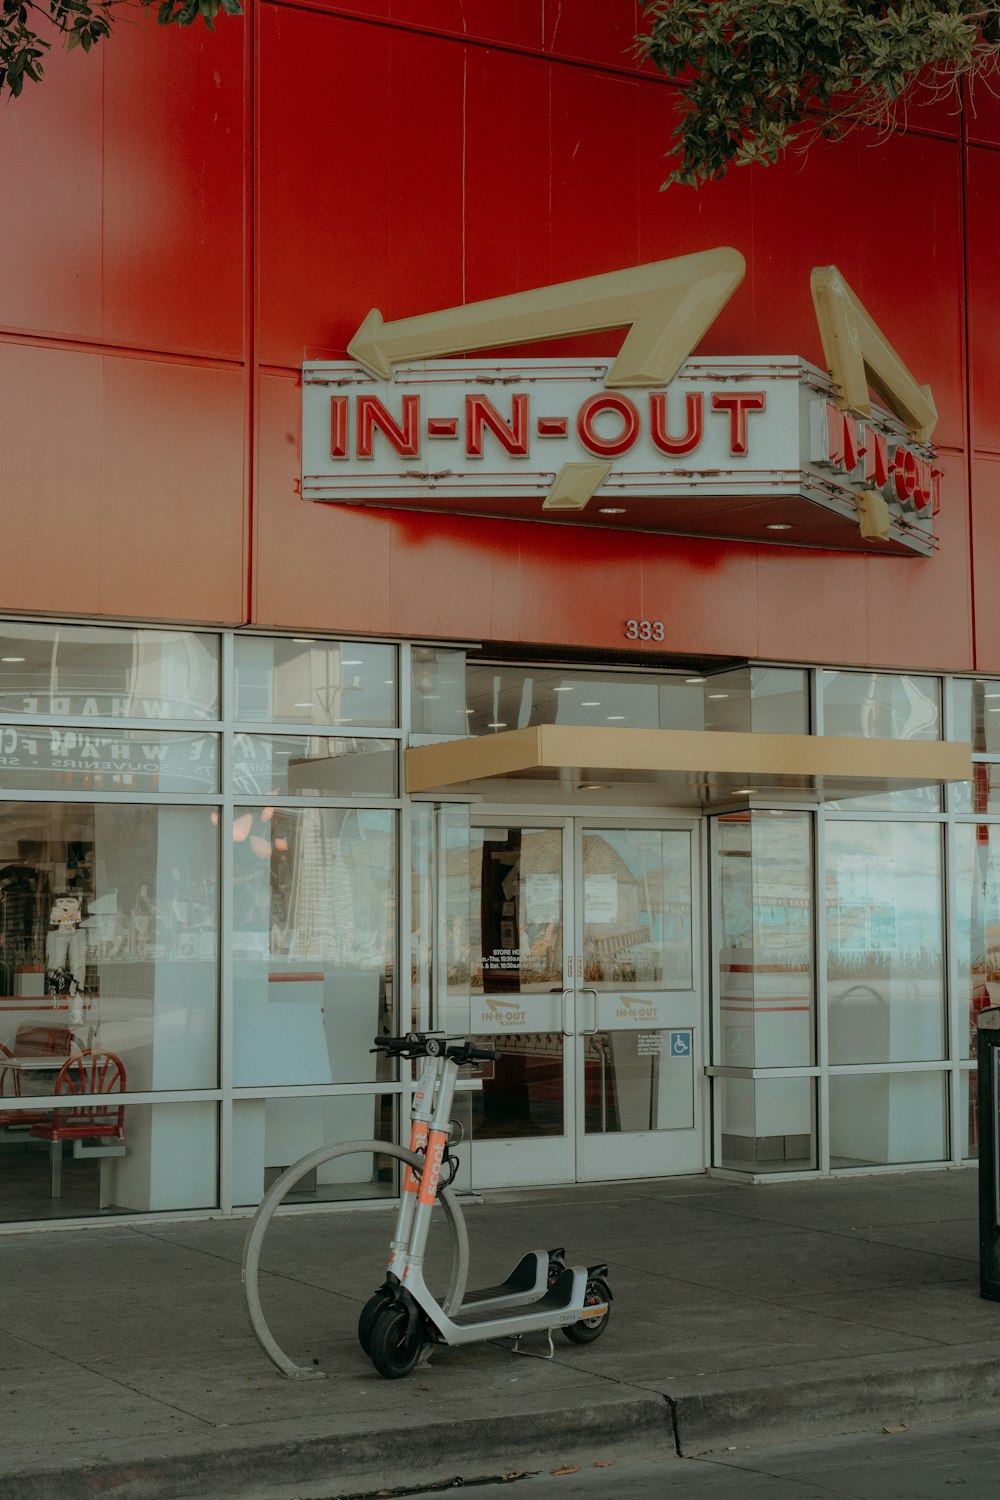 a scooter parked in front of an in - n - out restaurant